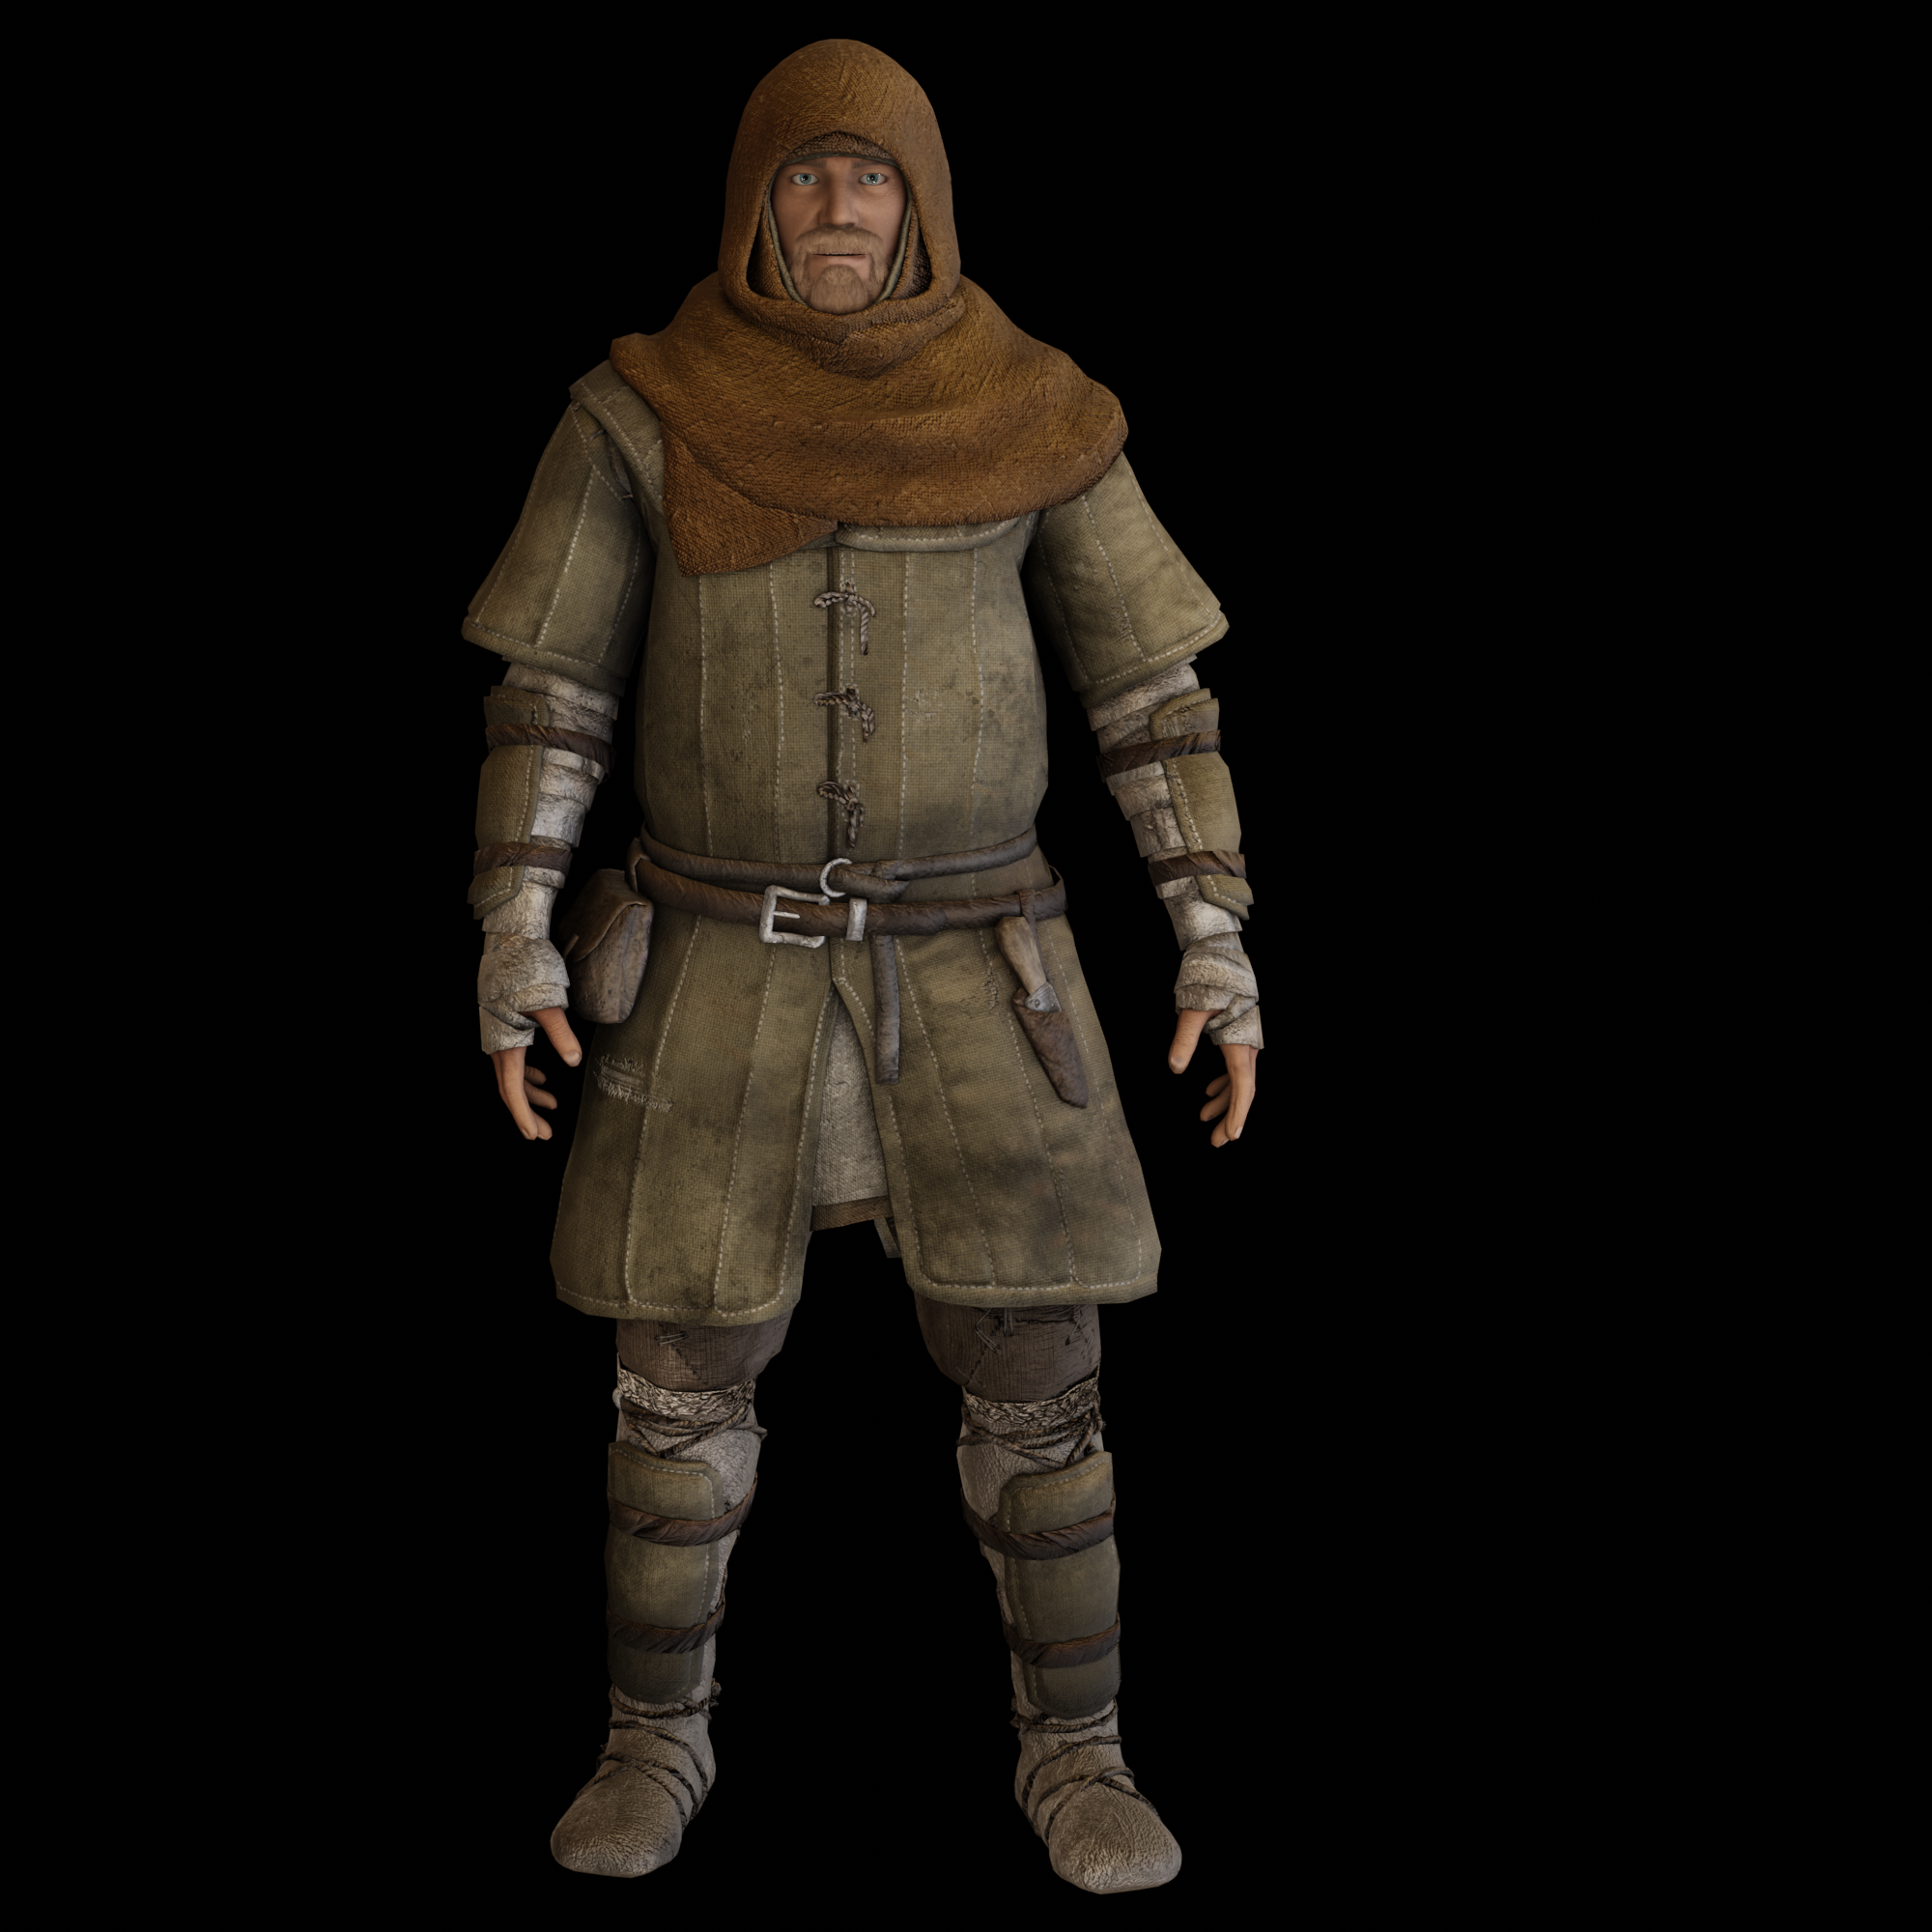 Medieval padded armour - Finished Projects - Blender Artists Community